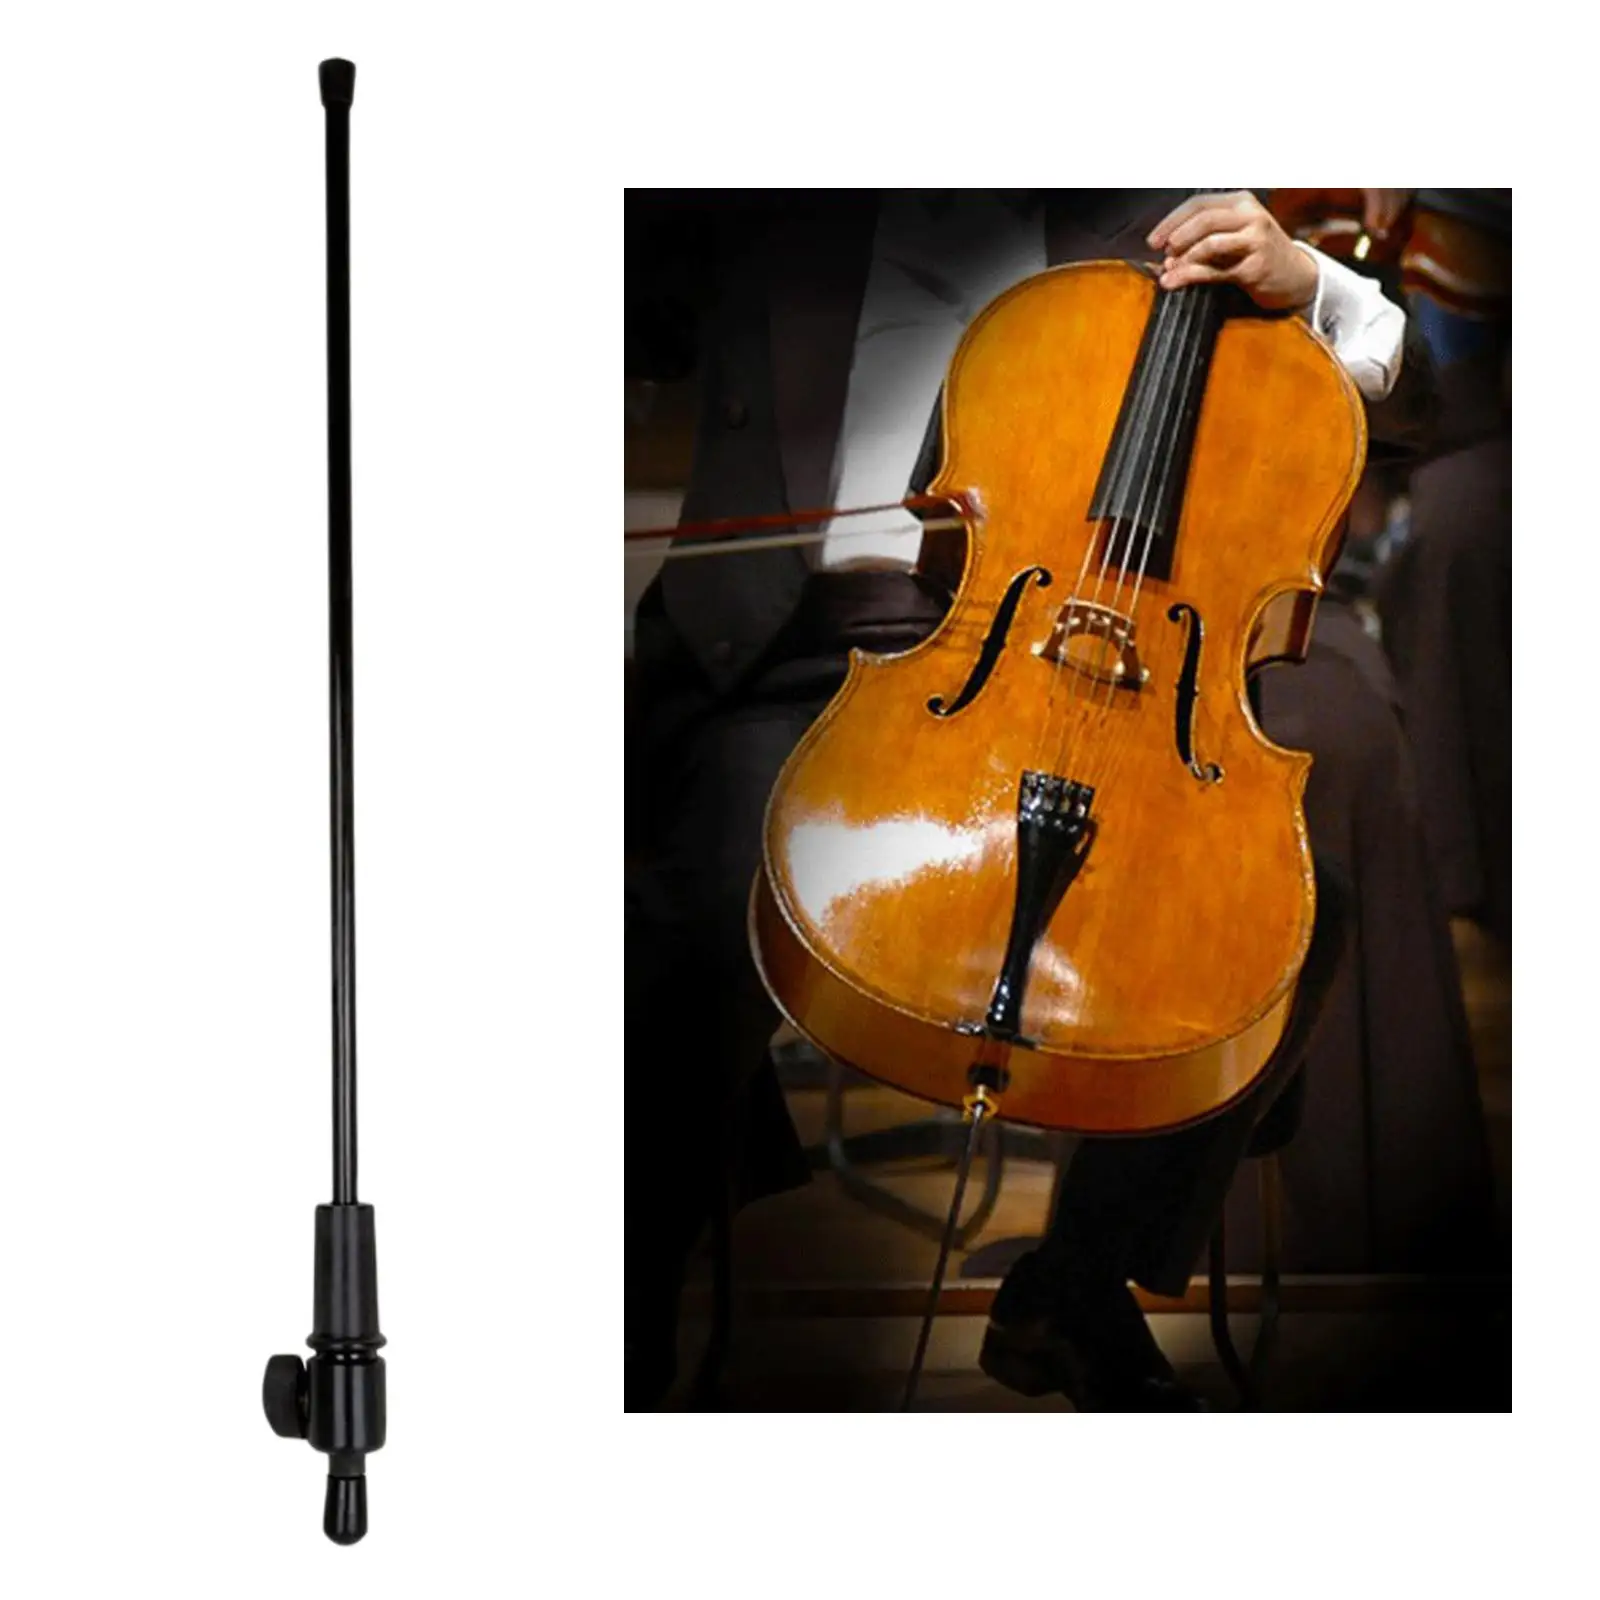 Professional    Accessory Musical Instrument for  Kids Adults  Beginners